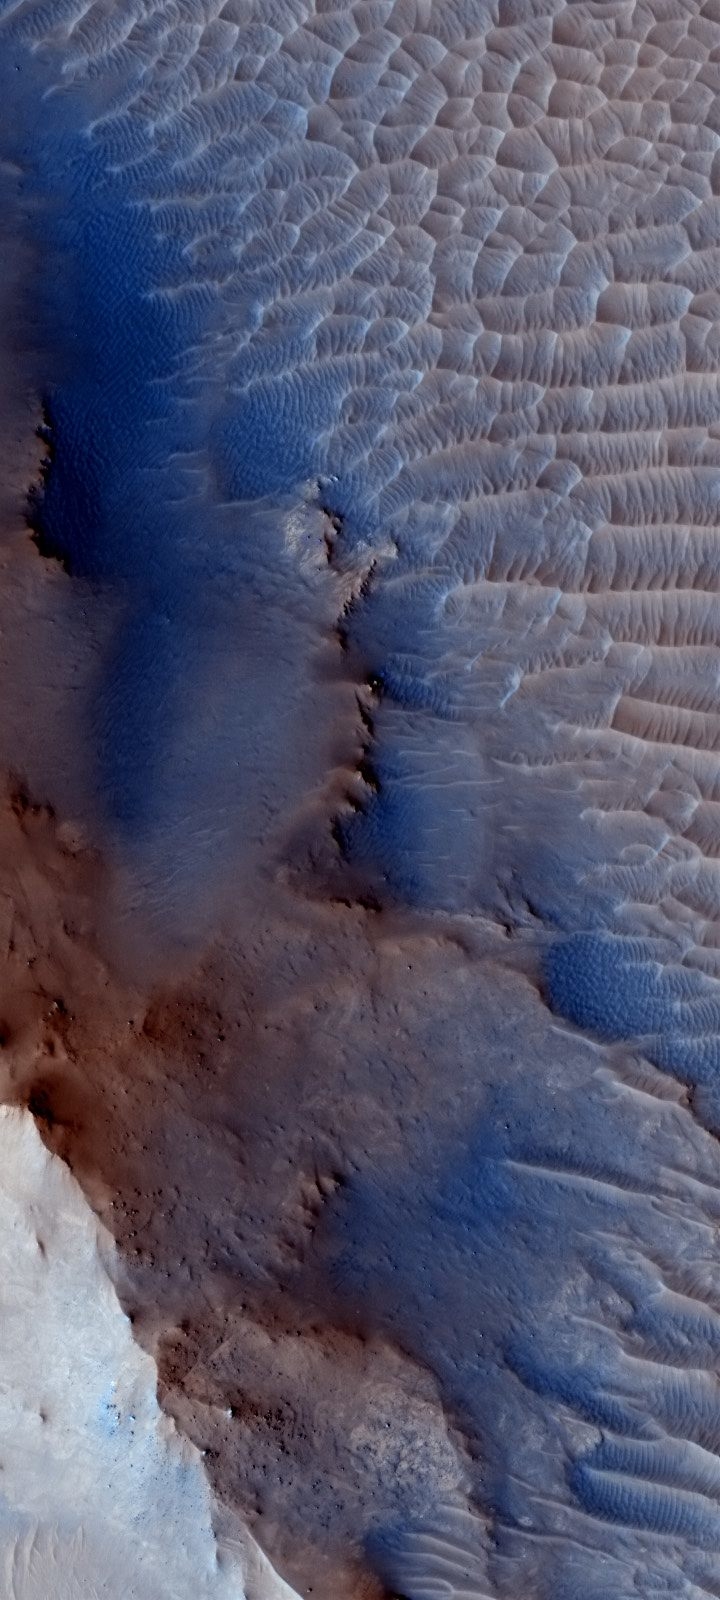 impact crater on mars